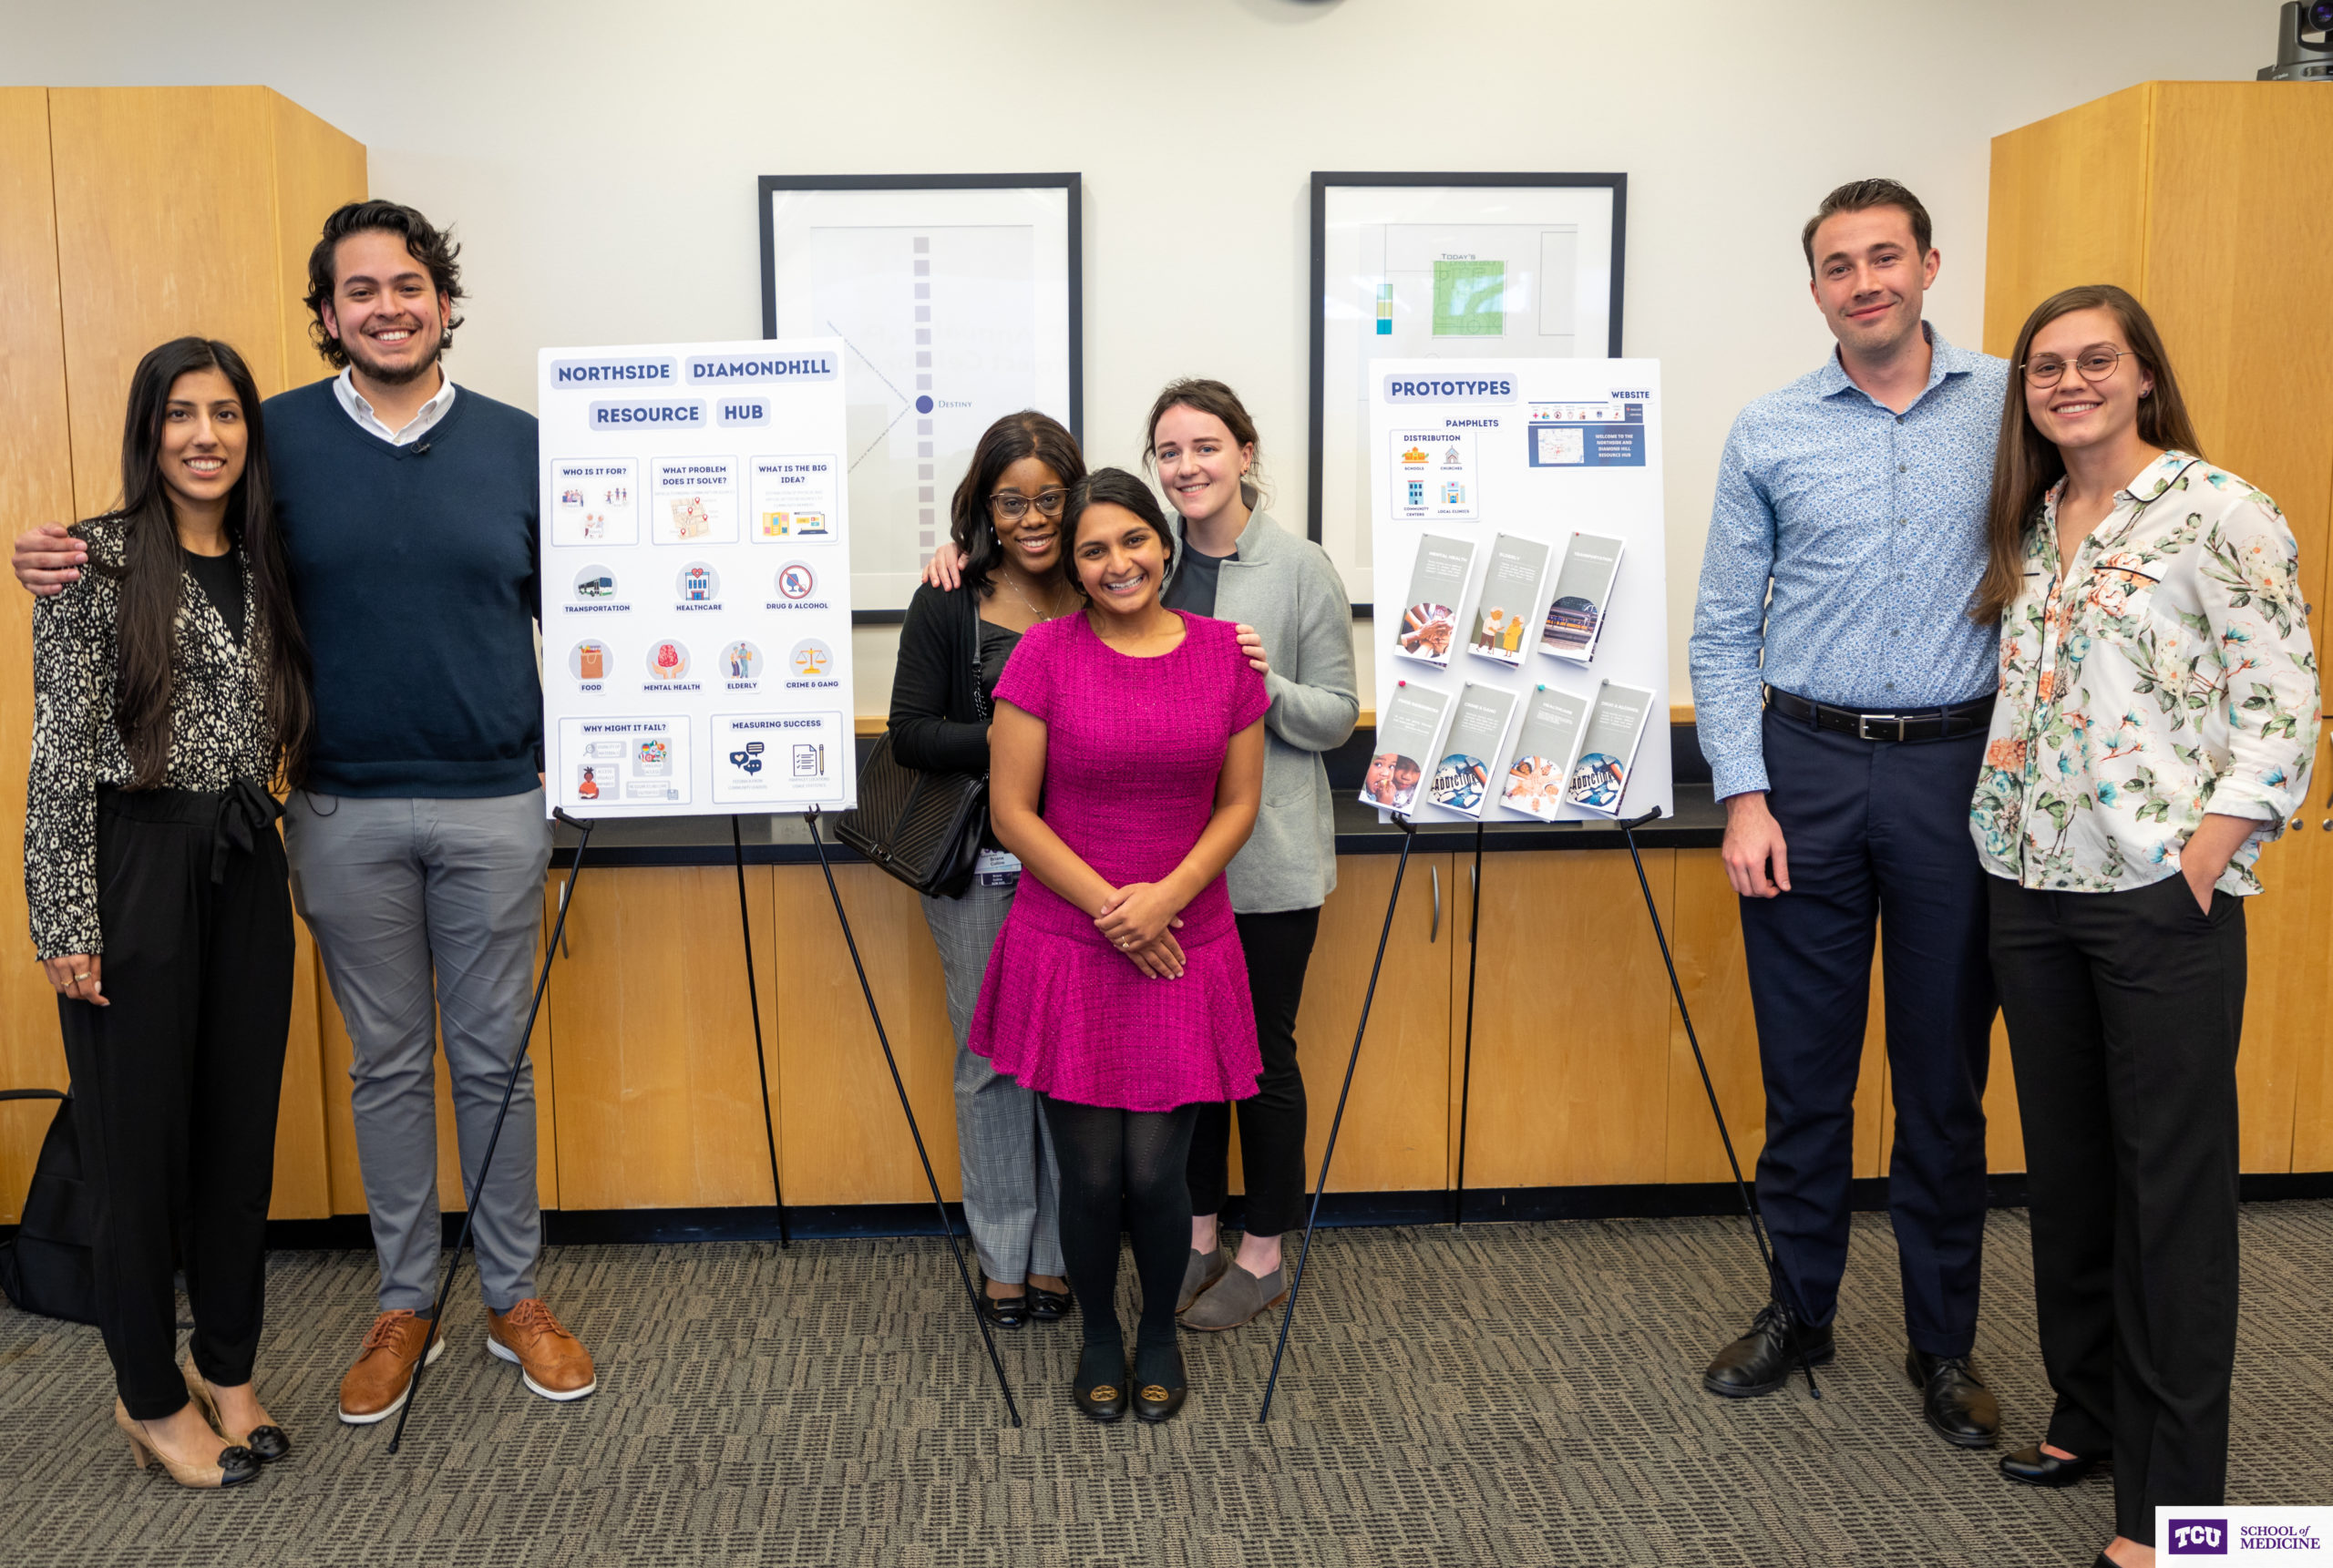 : TCU School of Medicine THRIVE Learning community members of Honris and Empatheia houses present their poster for the Northside/Diamond Hill community at the first annual P4P: Community Impact Project Celebration. The members pictured above are (from left to right): Sarah Cheema, Edmundo Esparza, Briana Collins, Juhi Shah, Sarah Lyon, Thomas Roser and Quinn Losefsky.